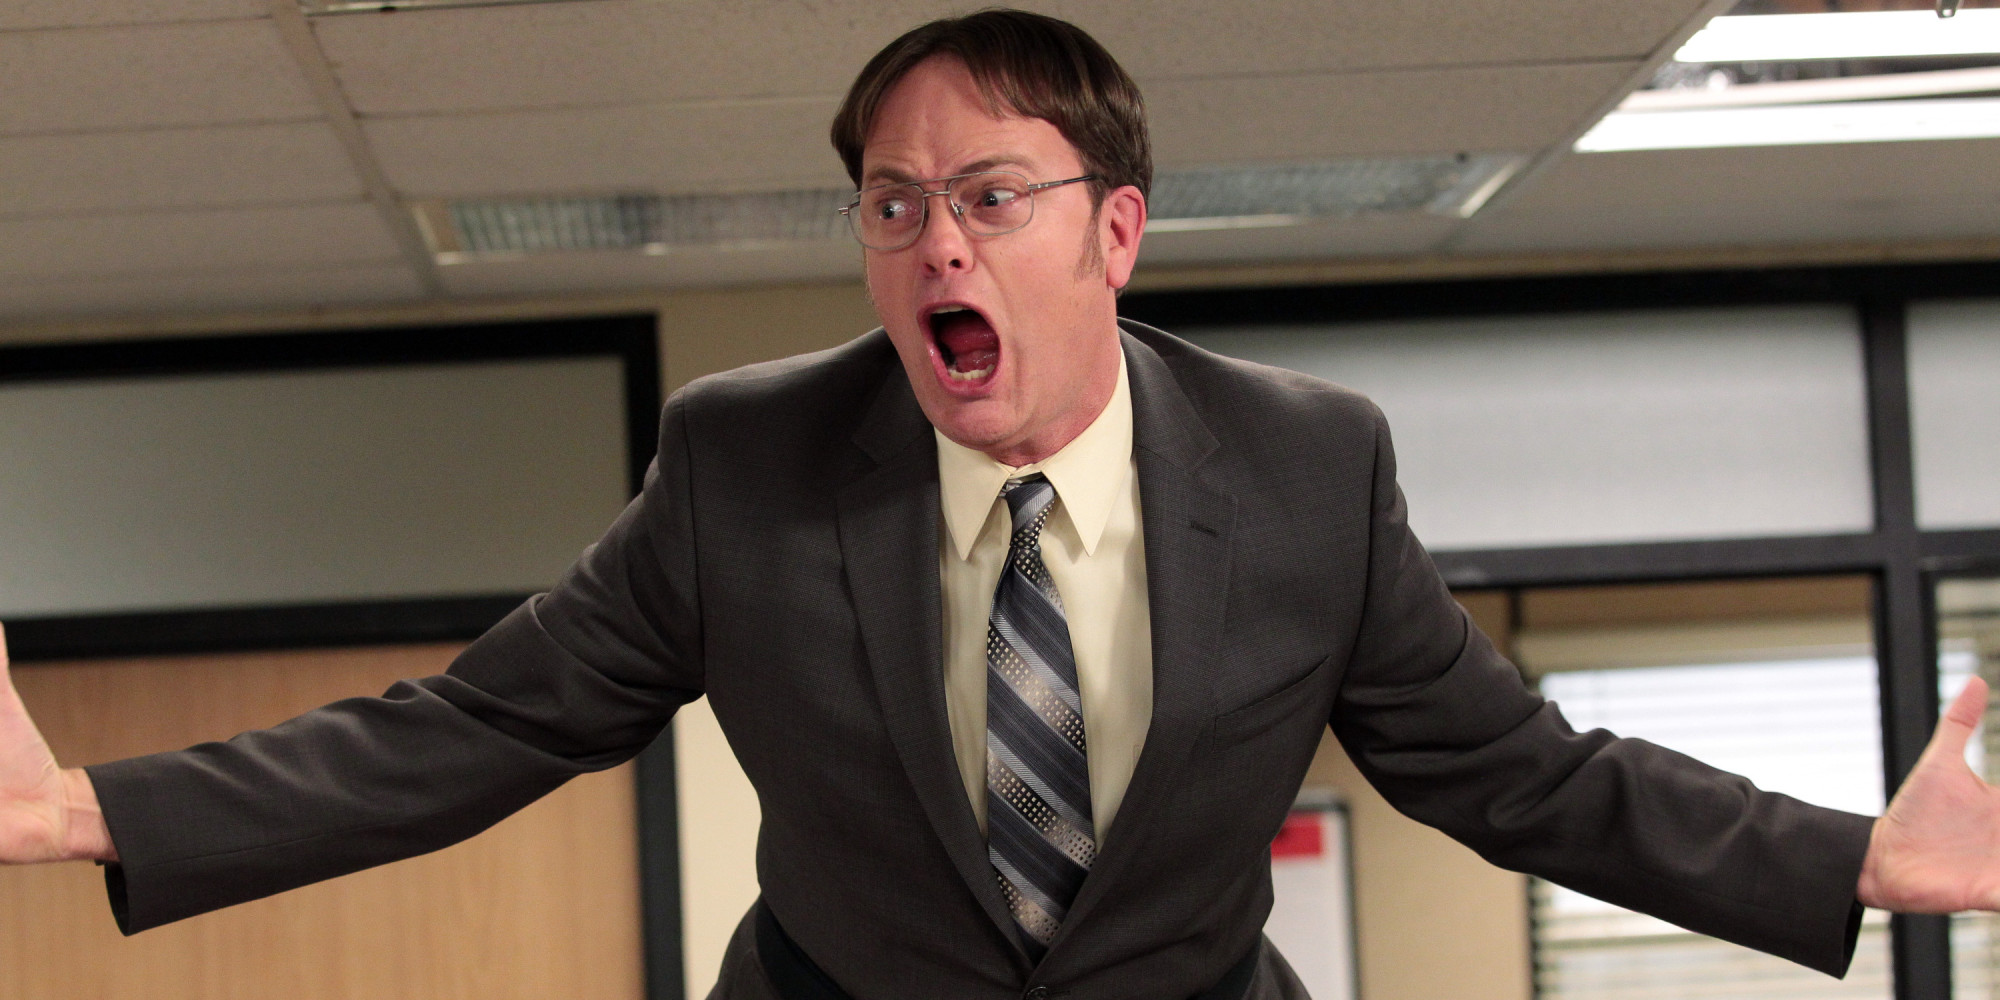 the-office-10-memes-that-perfectly-sum-up-dwight-as-a-character